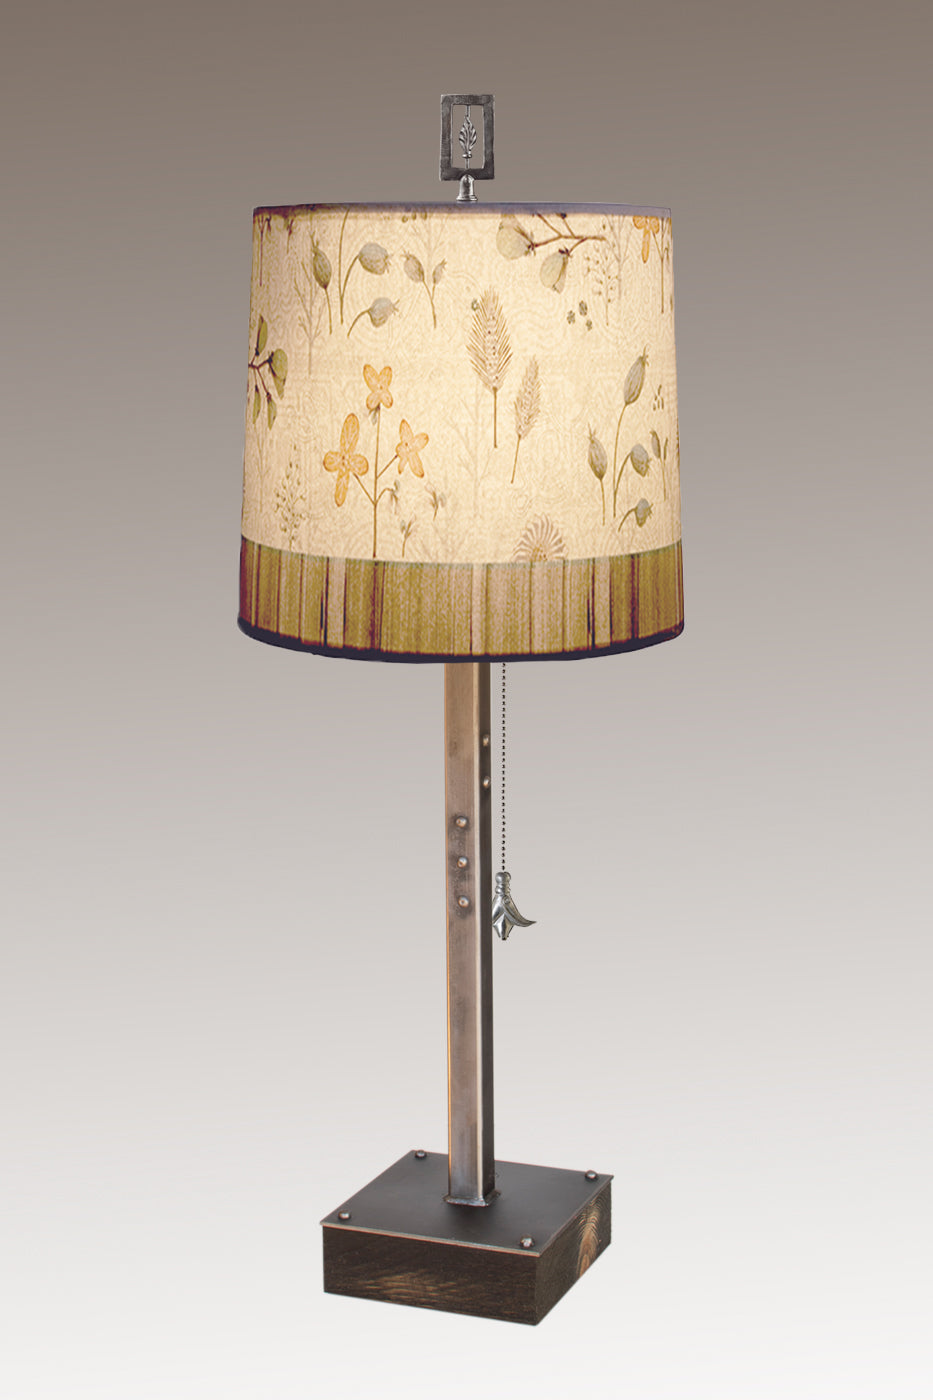 Janna Ugone & Co Table Lamps Steel Table Lamp on Wood with Medium Drum Shade in Flora & Maze